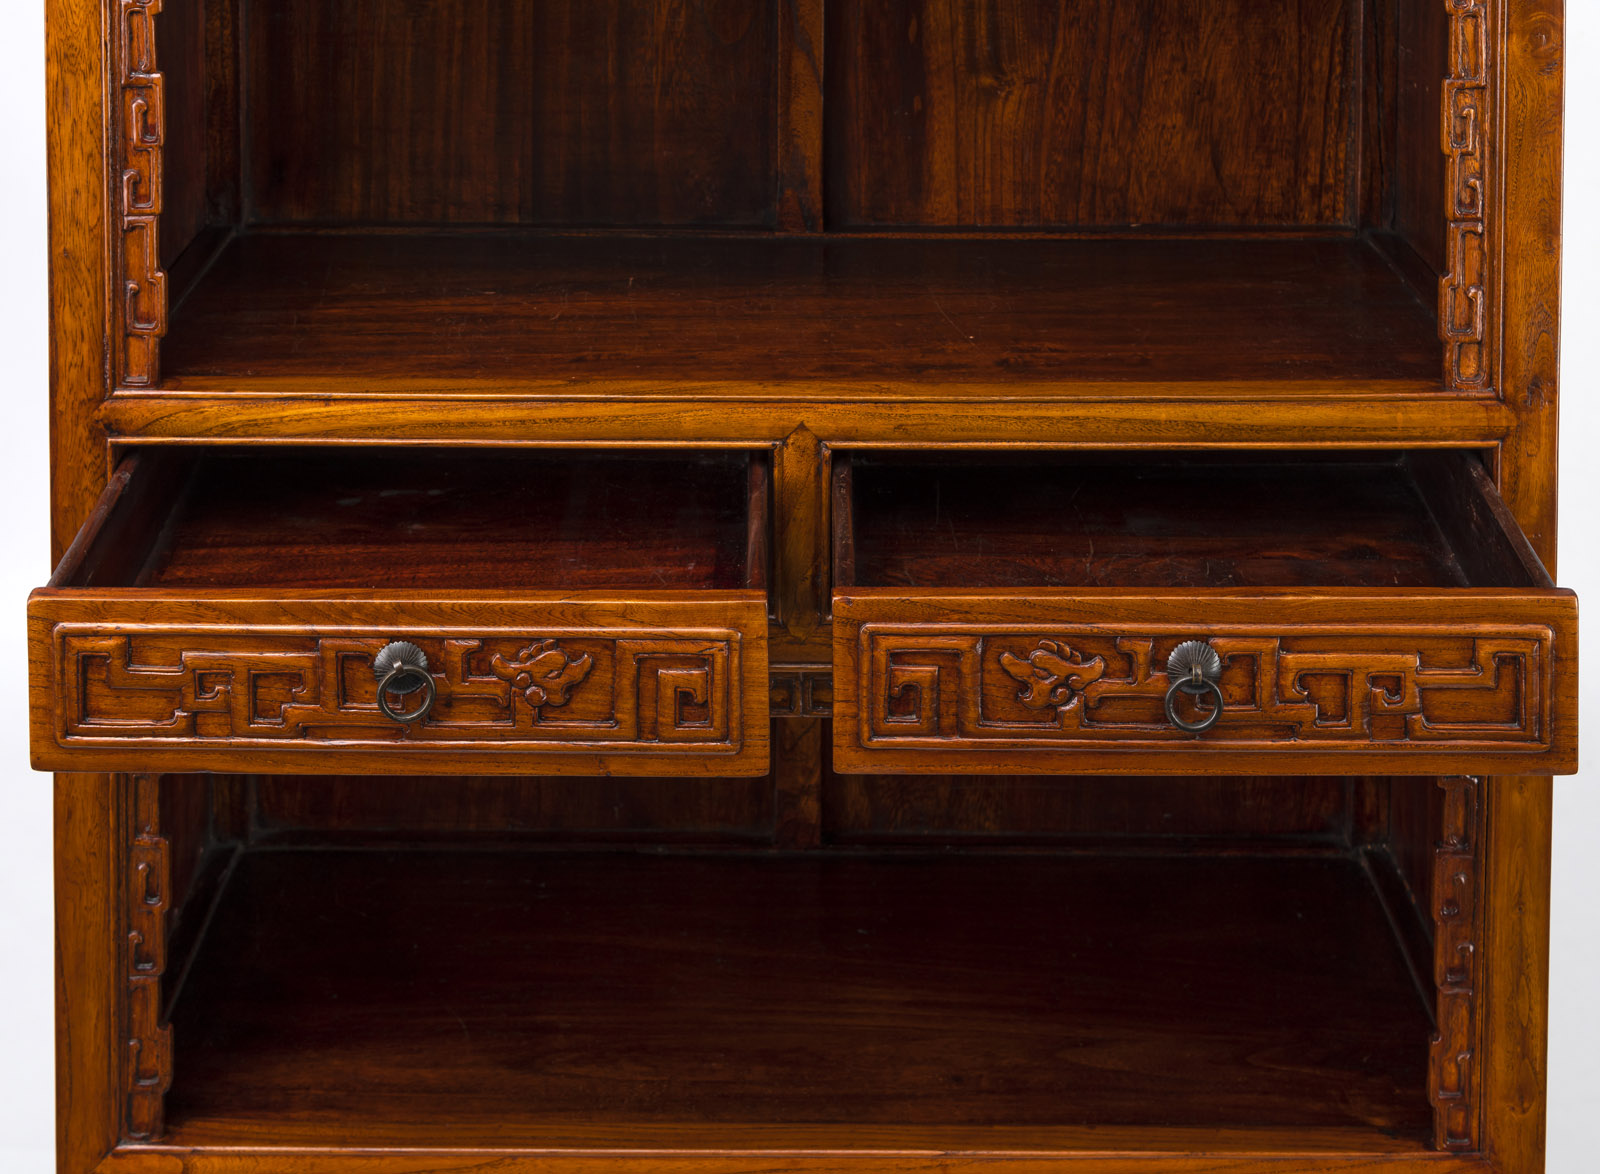 A WOODEN SHELF CABINET WITH TWO DRAWERS, CARVED WITH DRAGON DECORATION - Image 7 of 7